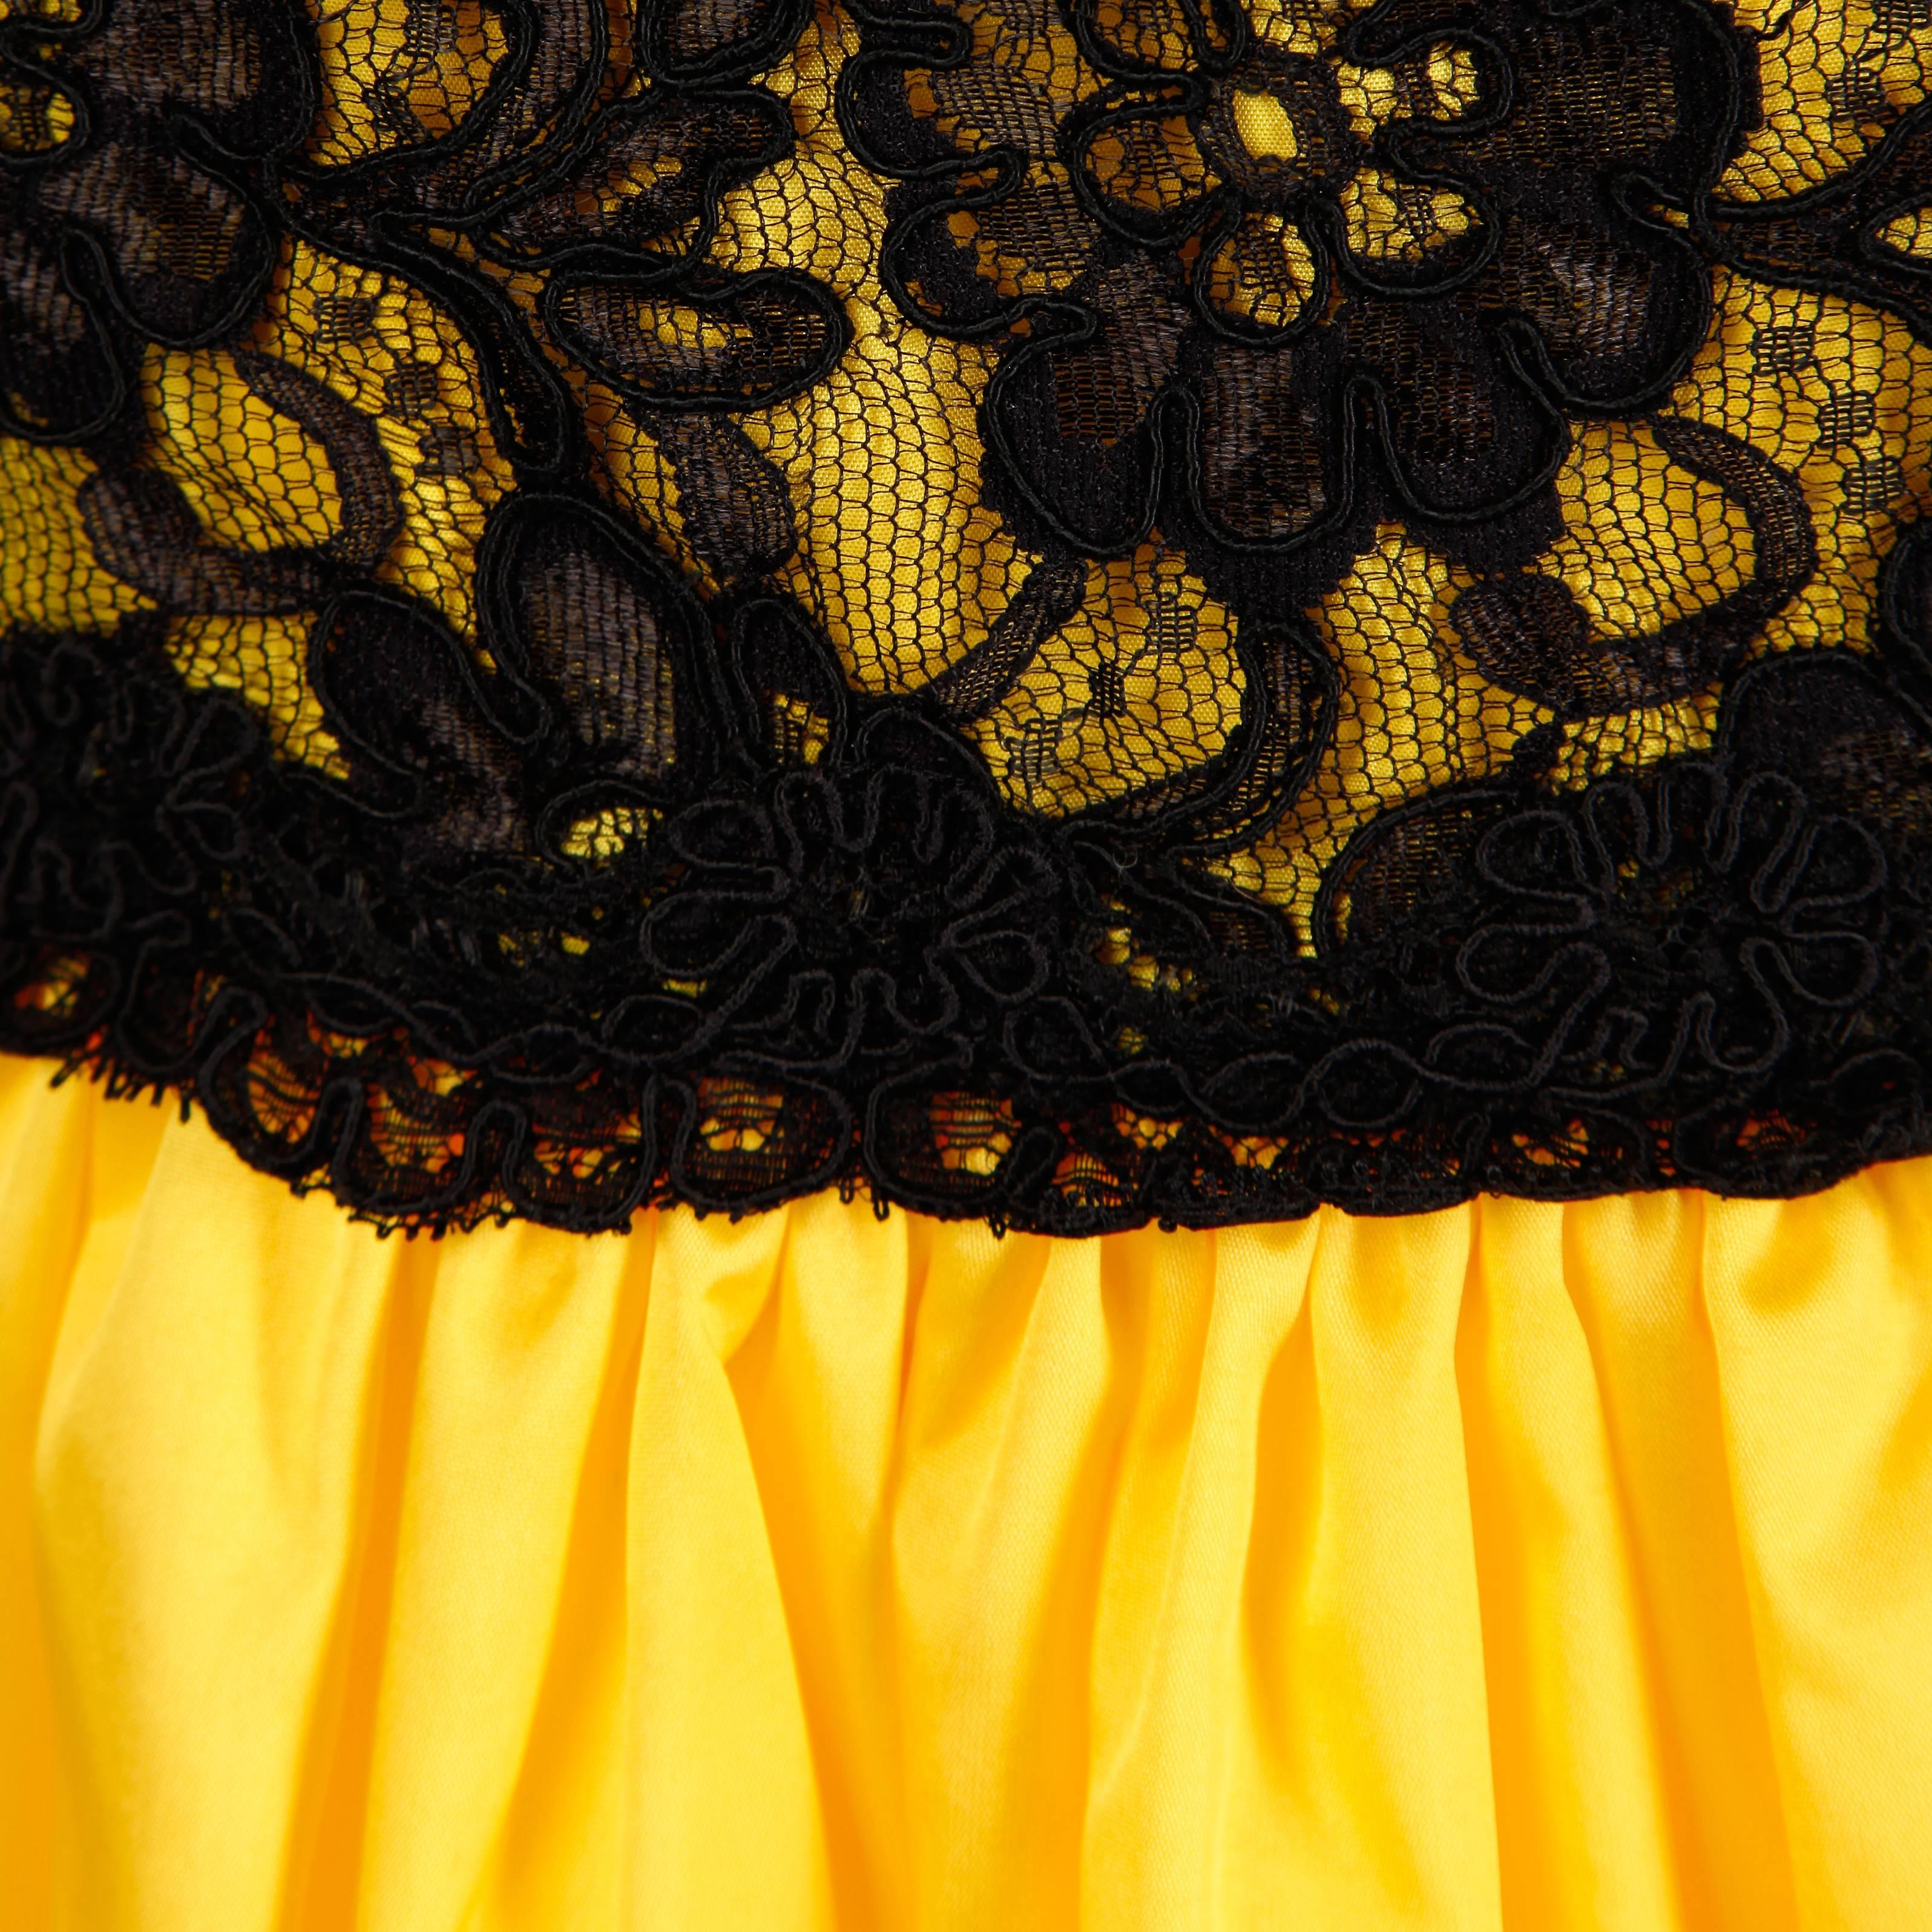 Women's Bill Blass Vintage Yellow and Black Lace Halter Dress For Sale